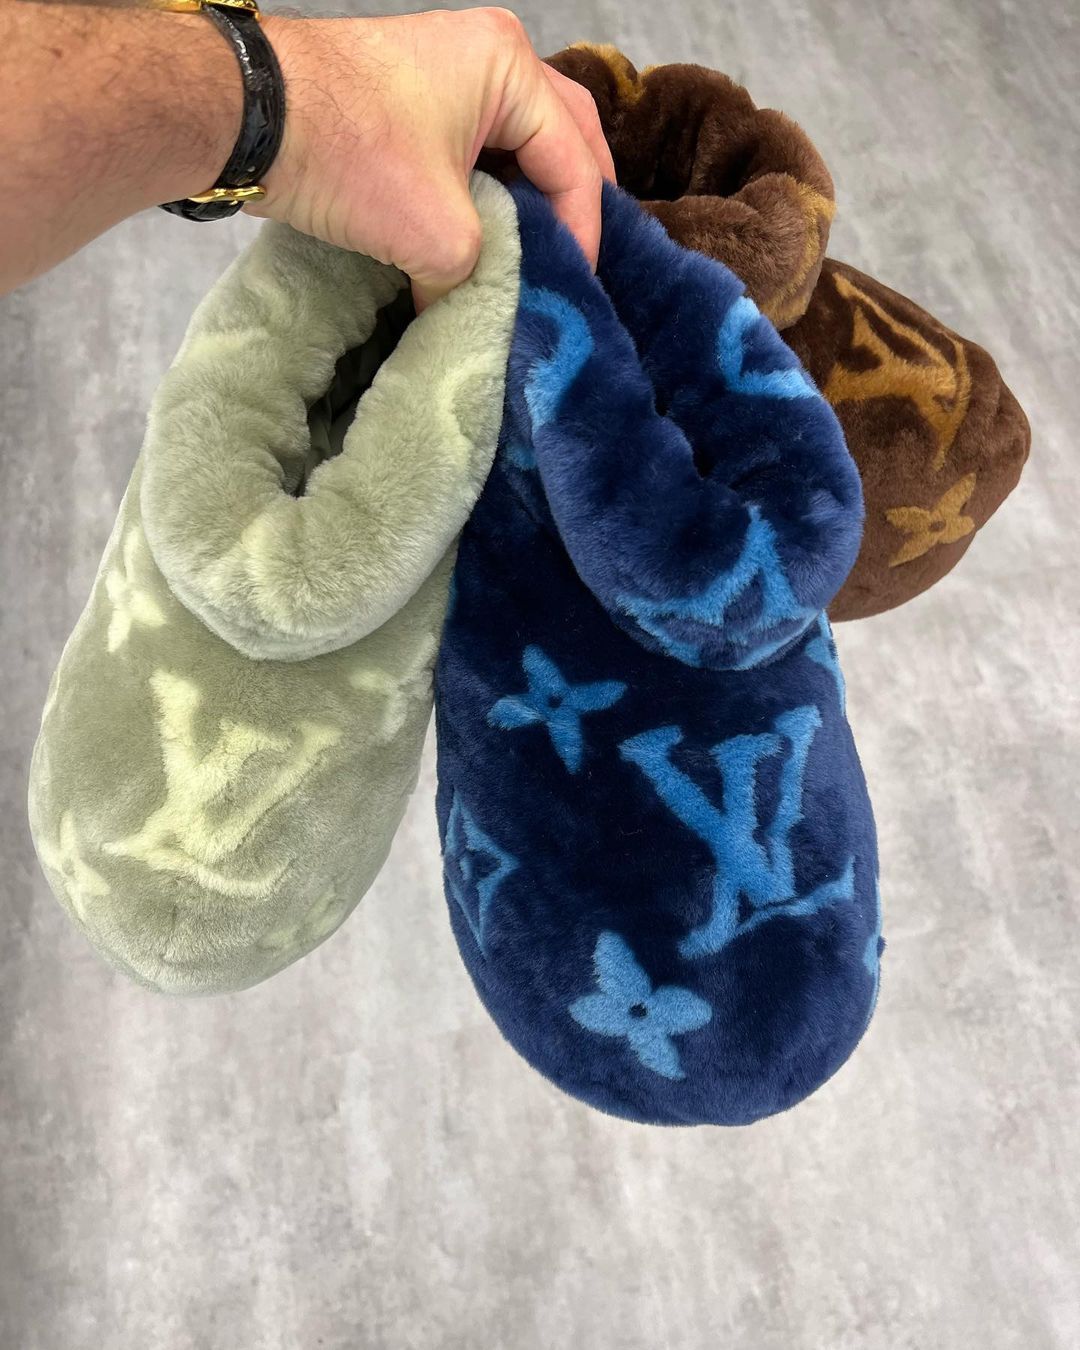 From Pharrell's fuzzy Louis Vuitton slippers to MSCHF's big yellow